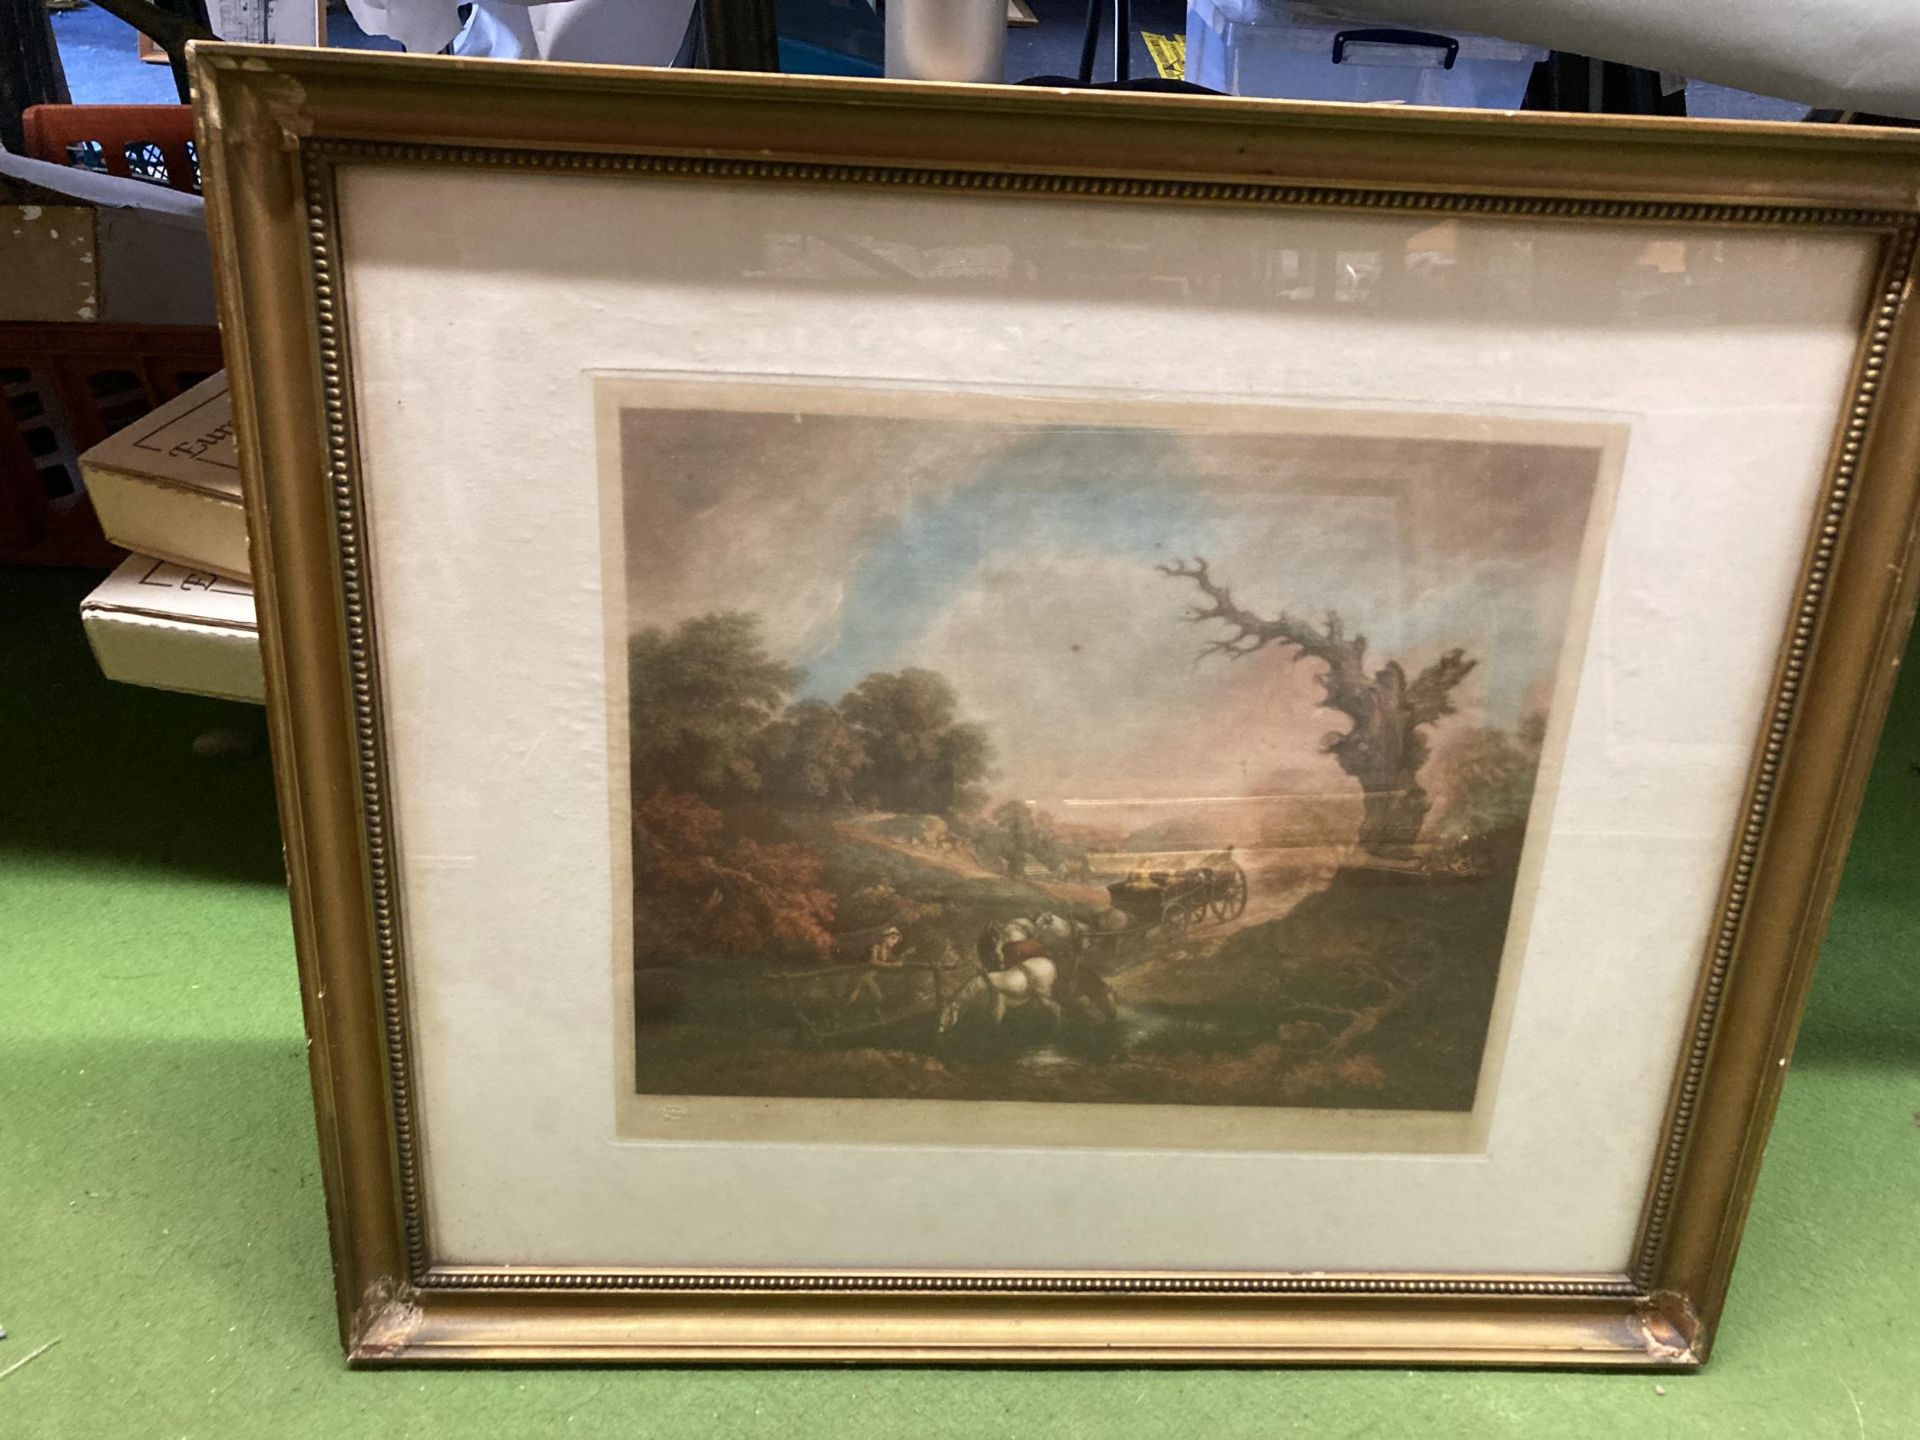 A GILT FRAMED ENGRAVING OF A HORSE AND CART SCENE